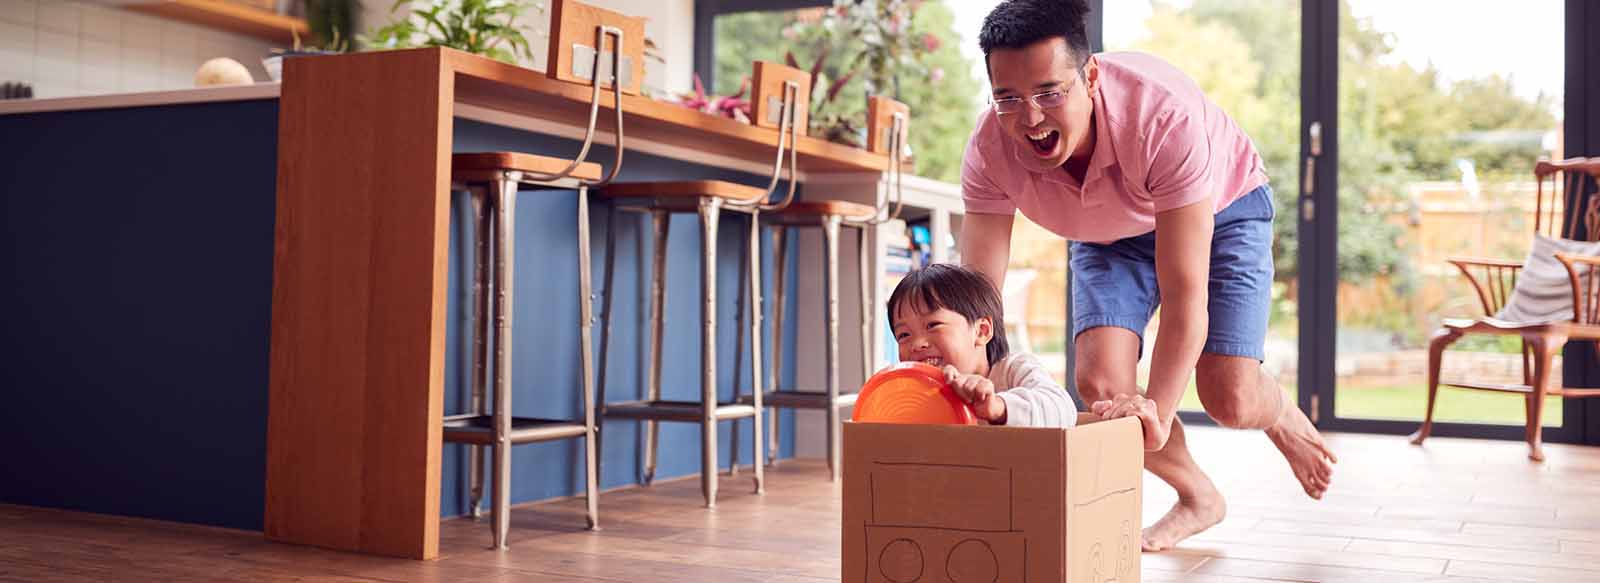 Father pushing son in cardboard box at home